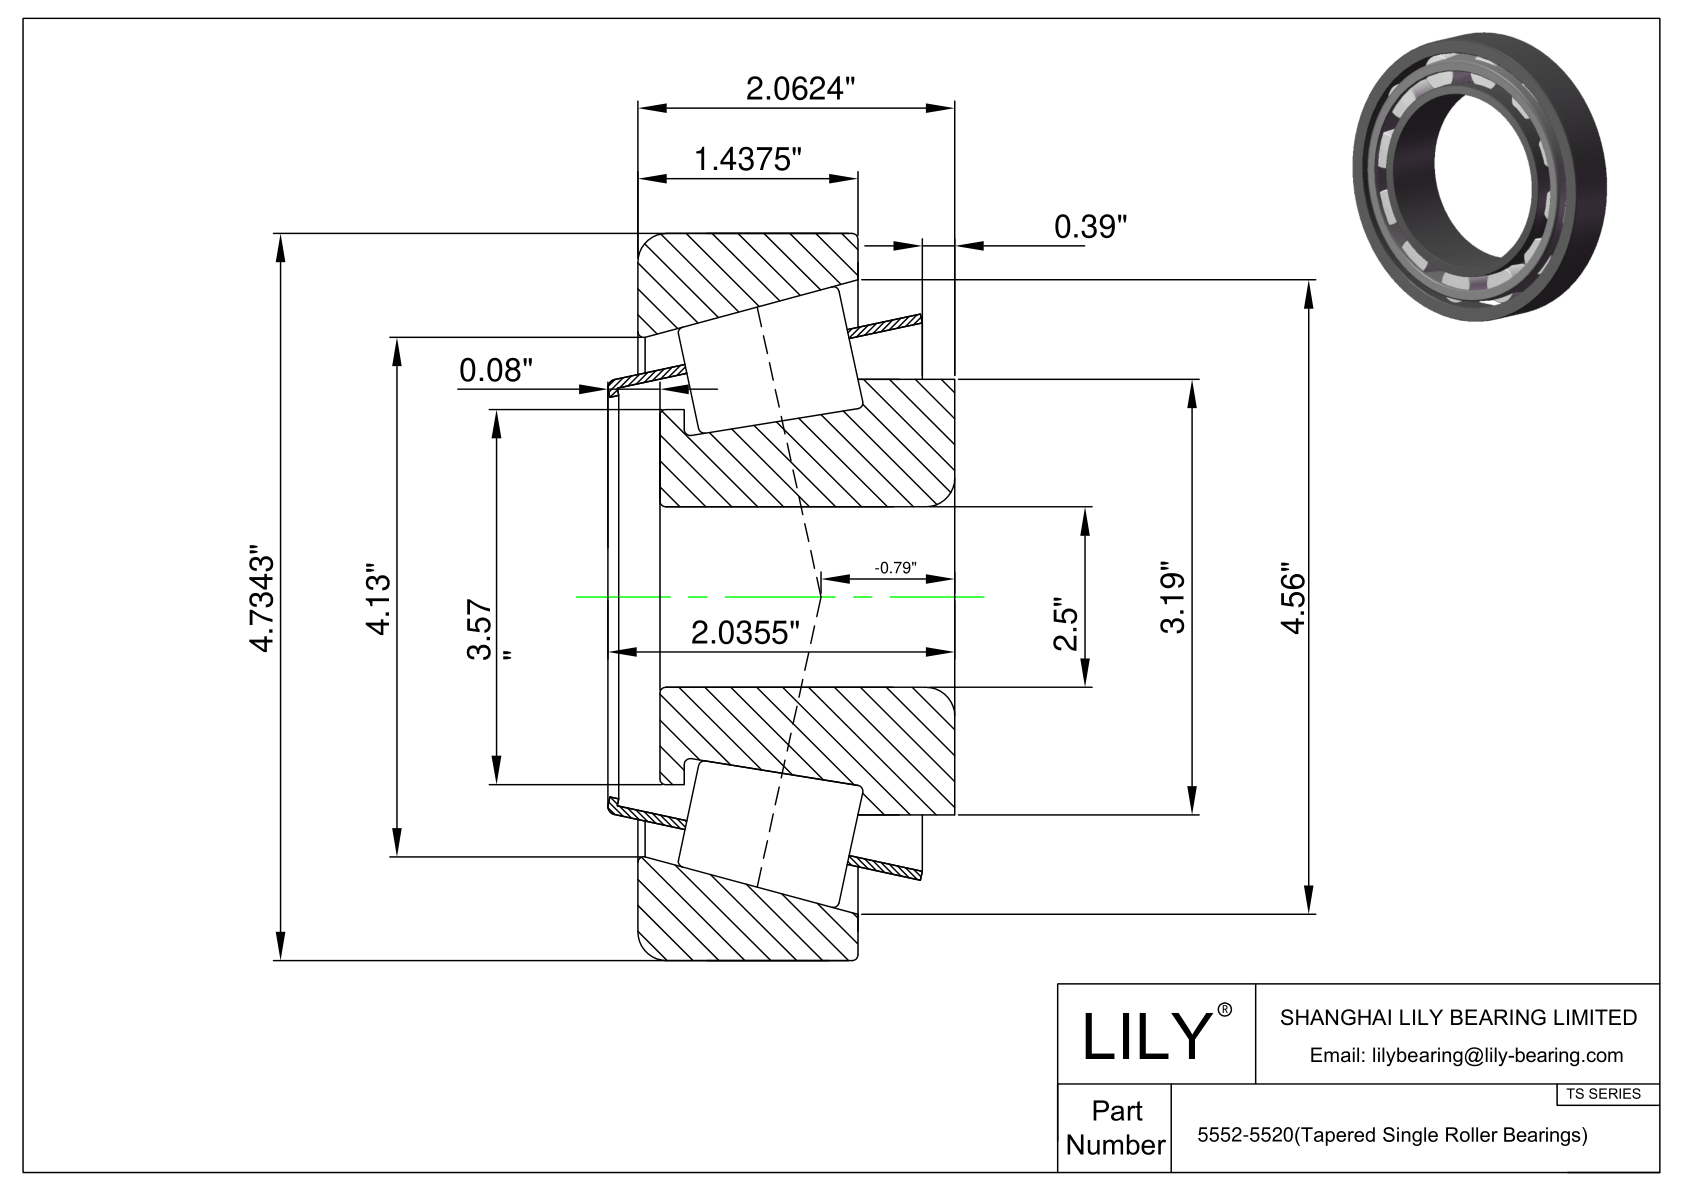 5552-5520 TS (Tapered Single Roller Bearings) (Imperial) cad drawing